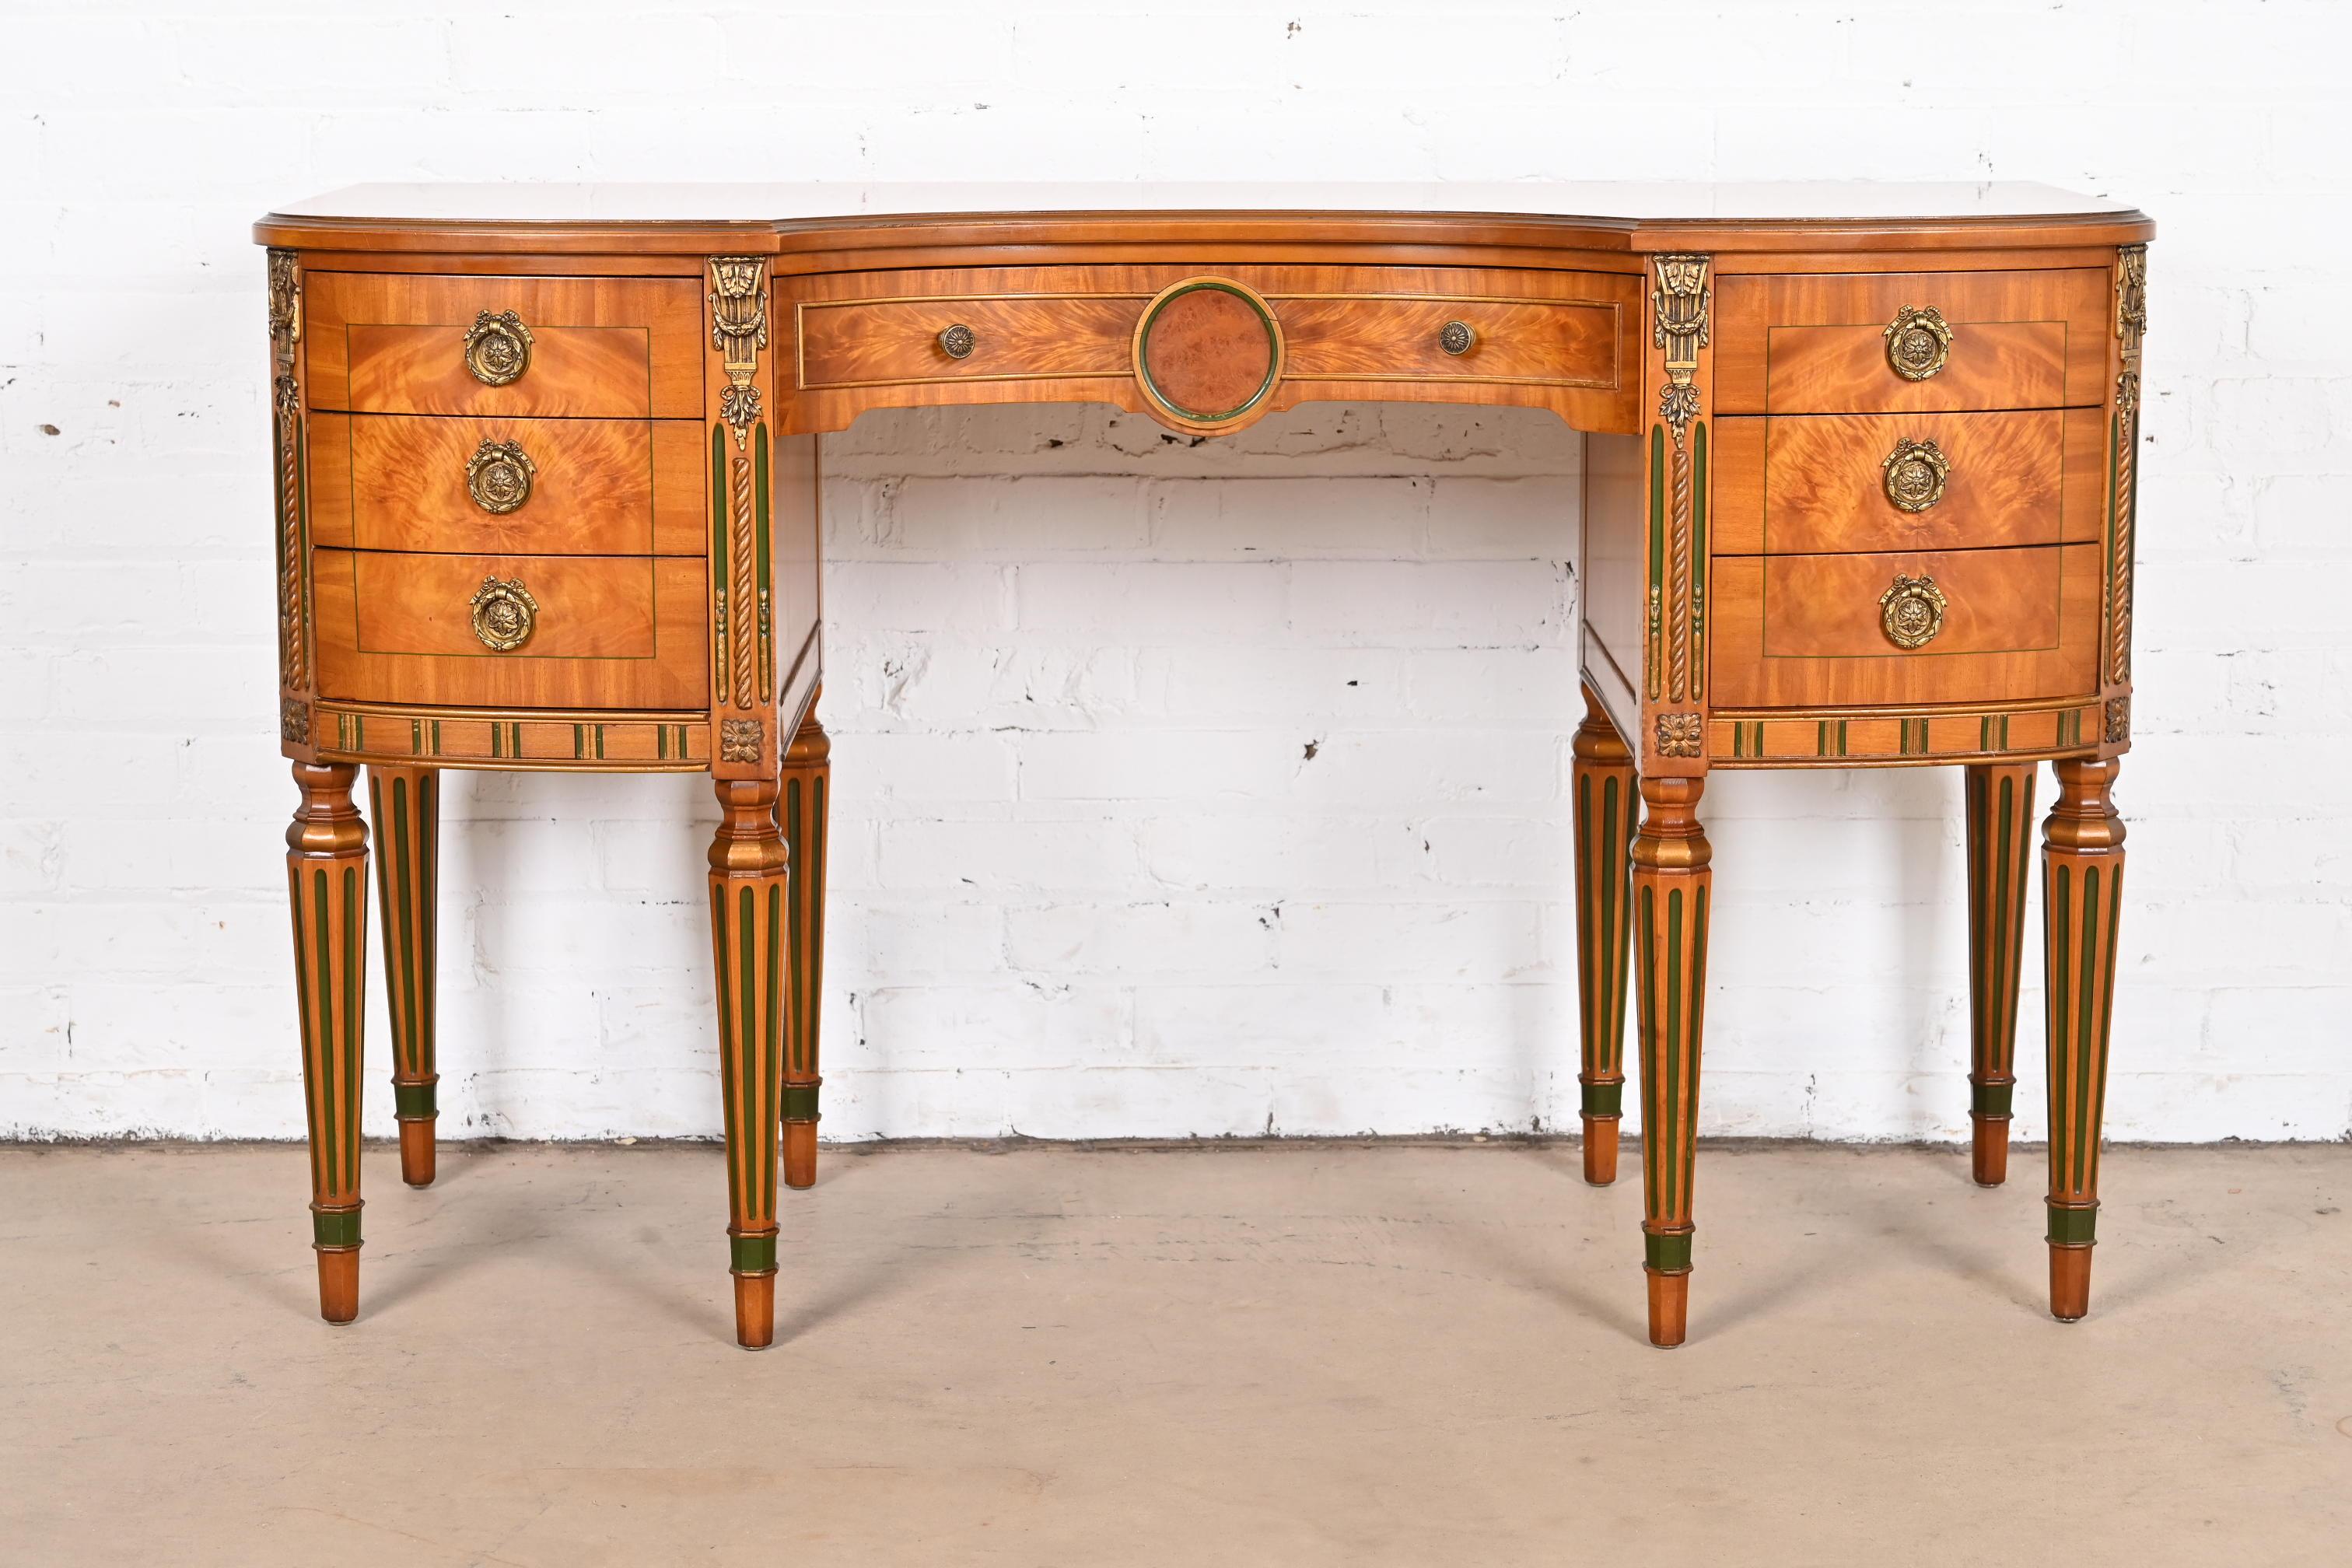 French Regency Louis XVI Satinwood Vanity With Bench Attributed to Romweber 1